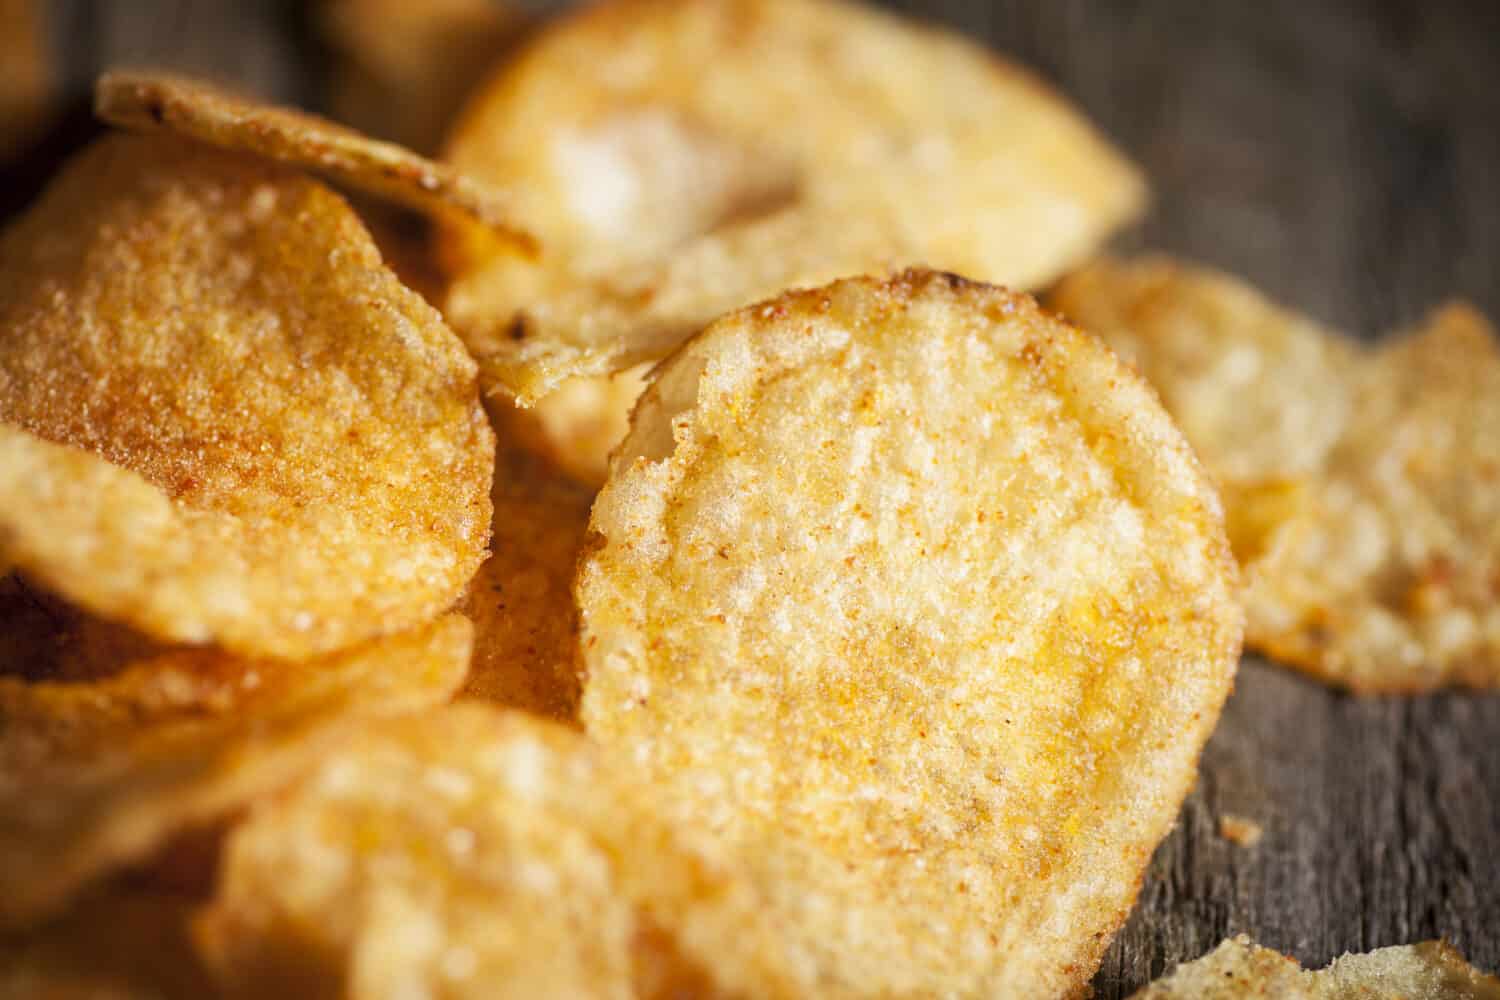 Potato kettle chips/crisps scattered on a textured wooden background. Close up macro shot